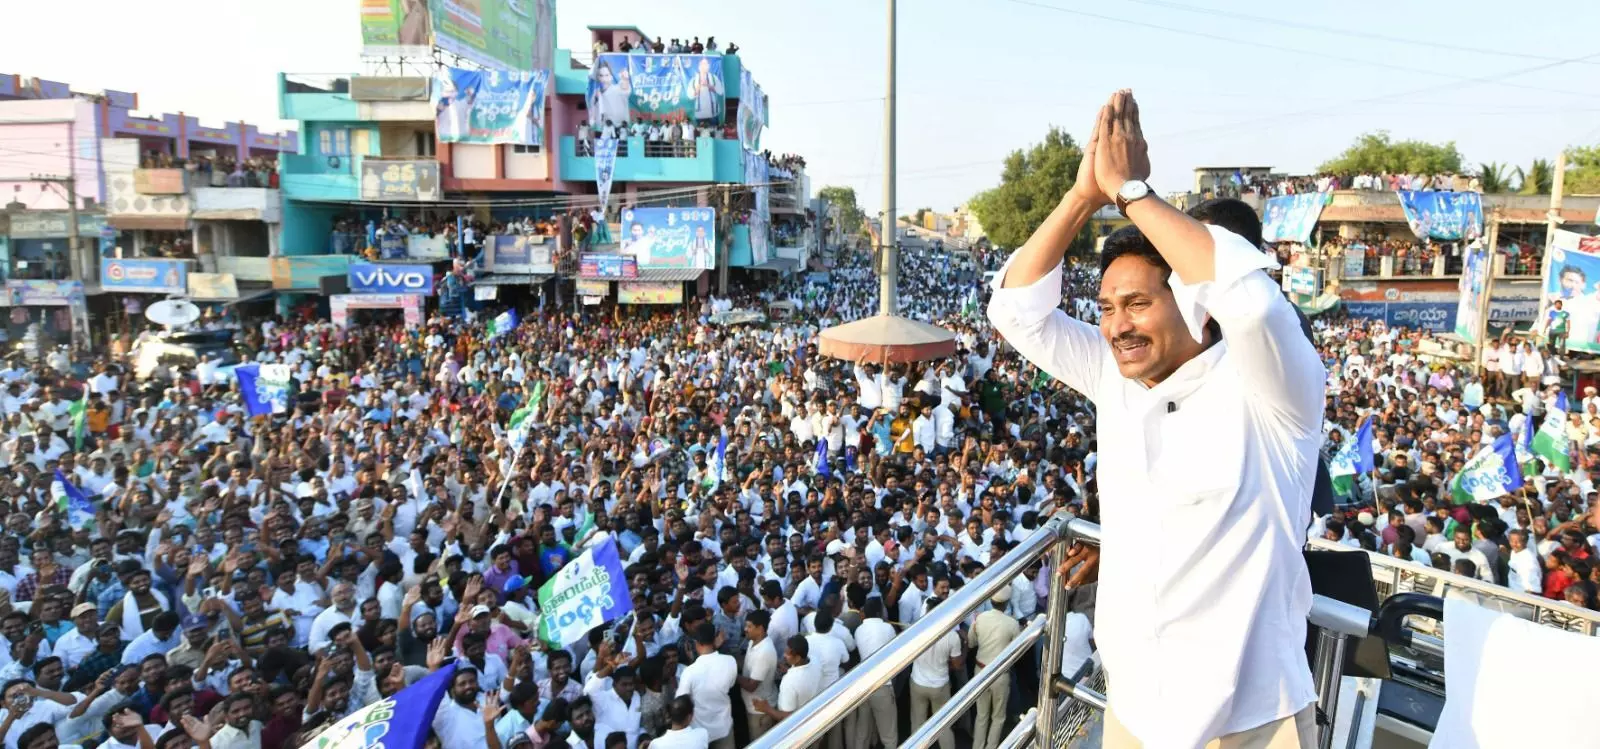 Jagan Reddy kicks off campaign in Proddatur, calls out sisters for supporting Chandrababu Naidu